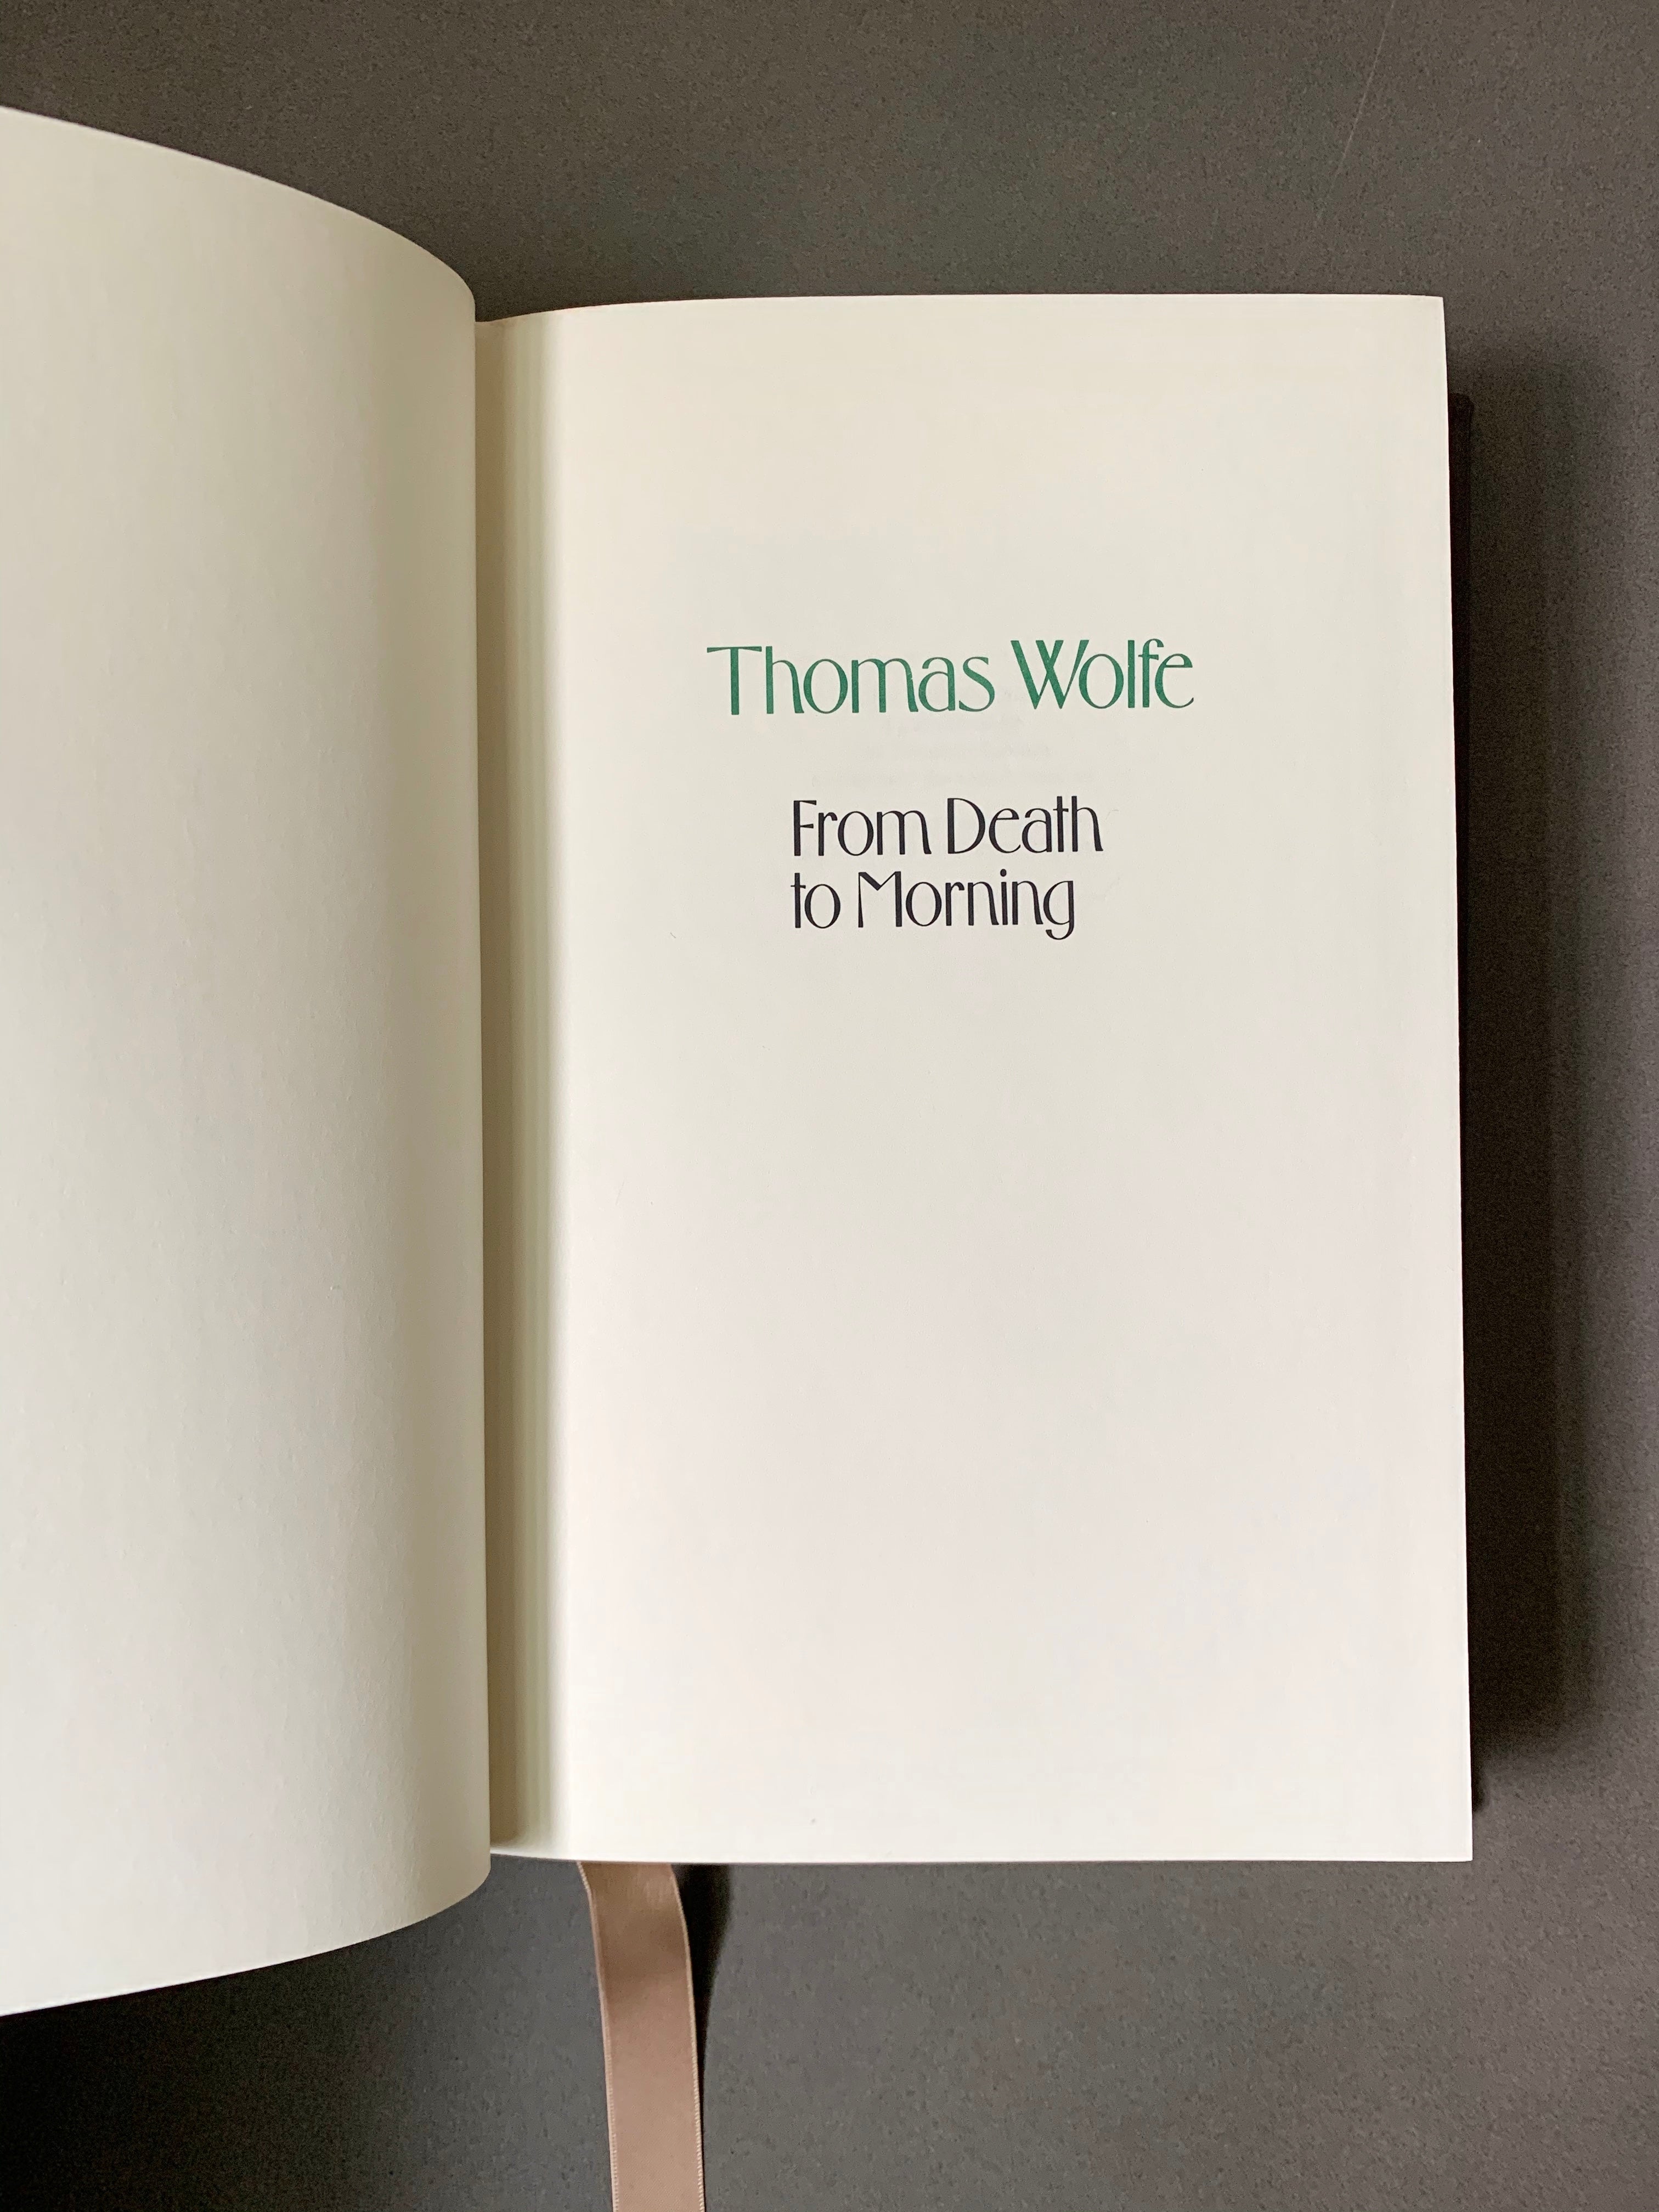 Franklin Library “From Death to Morning” by Thomas Wolfe, Limited Edition Collected Stories of the World's Greatest Writers Series